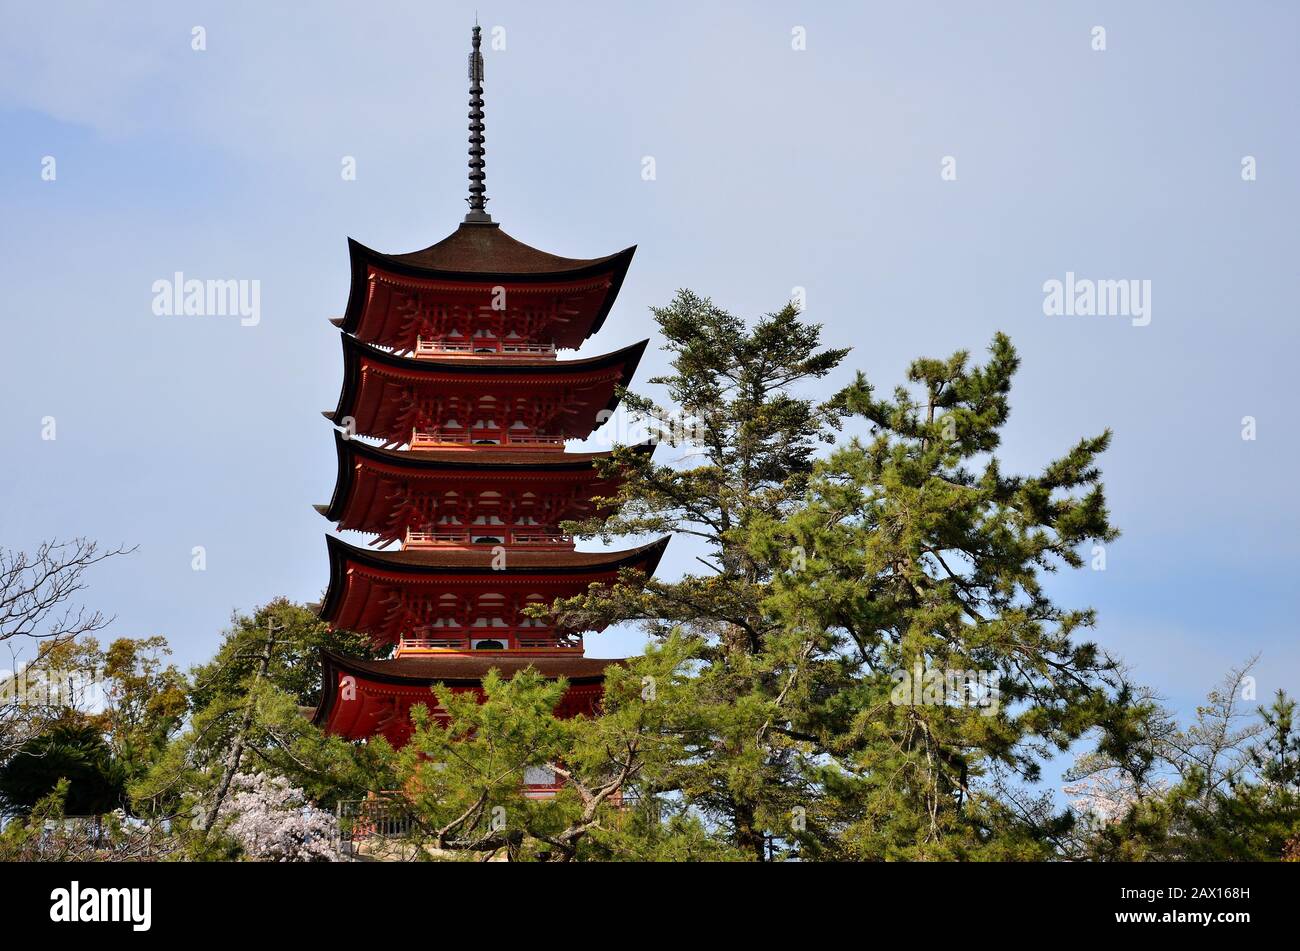 The tall structure of the temple stands out on the trees rising in the sky Stock Photo